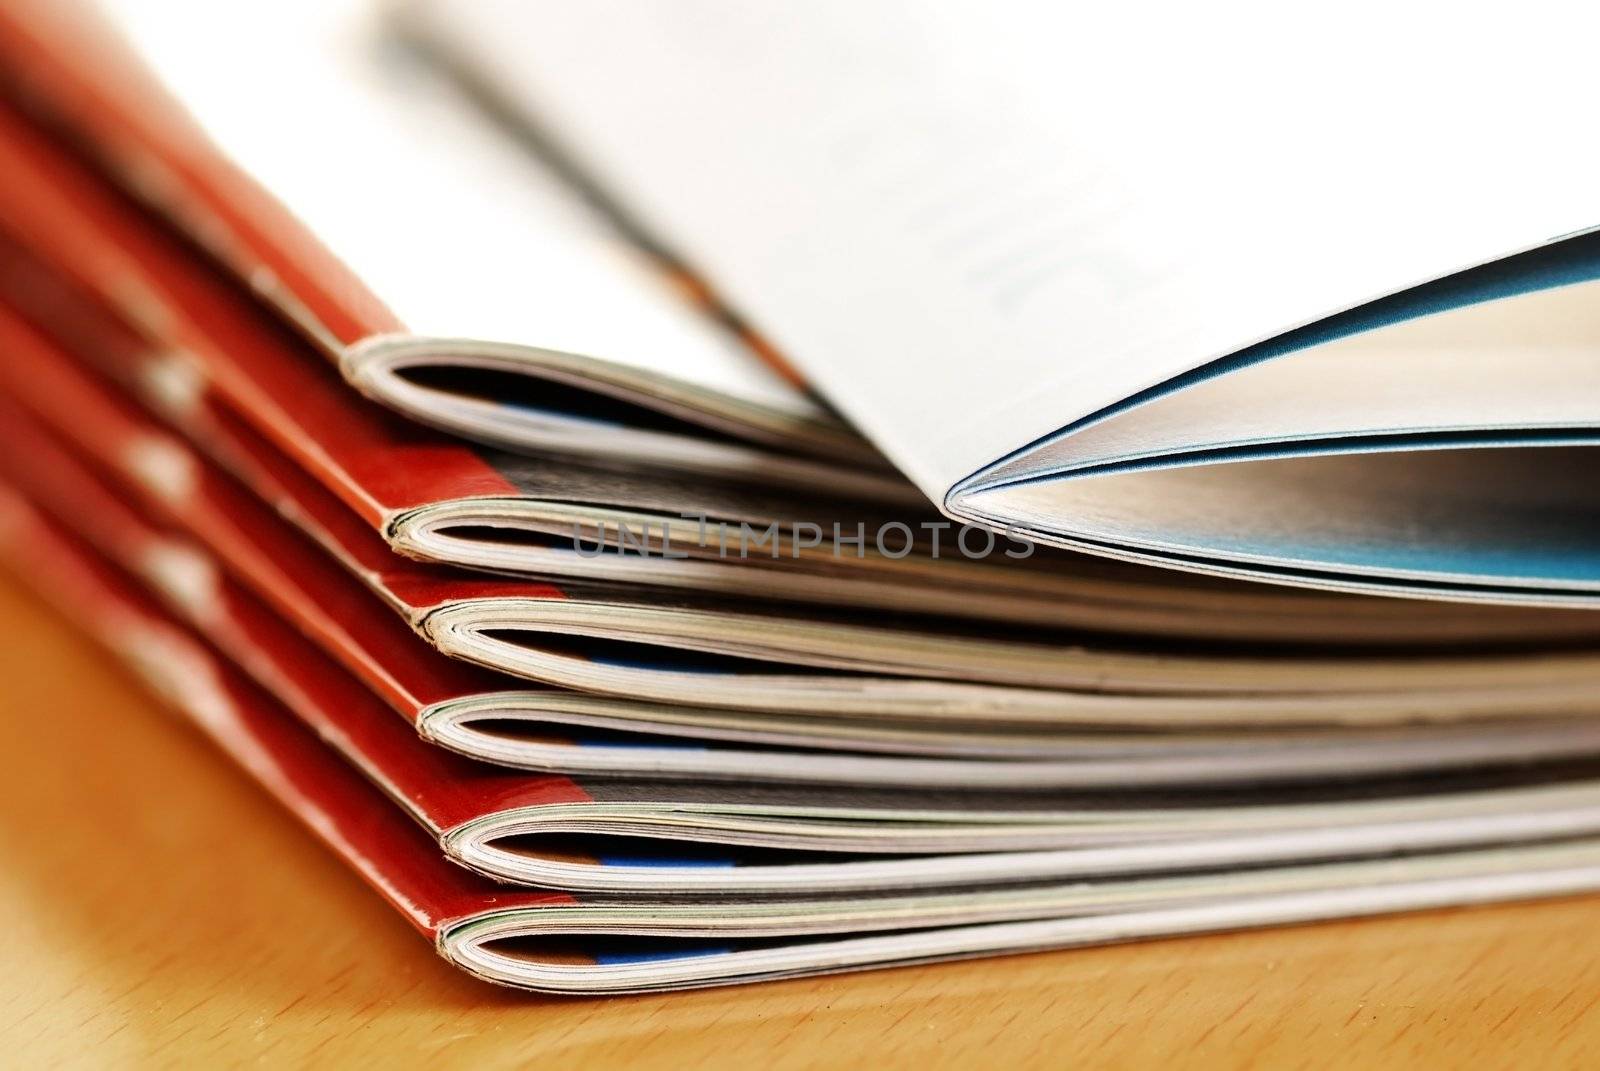 stack of same magazines with red covers closeup